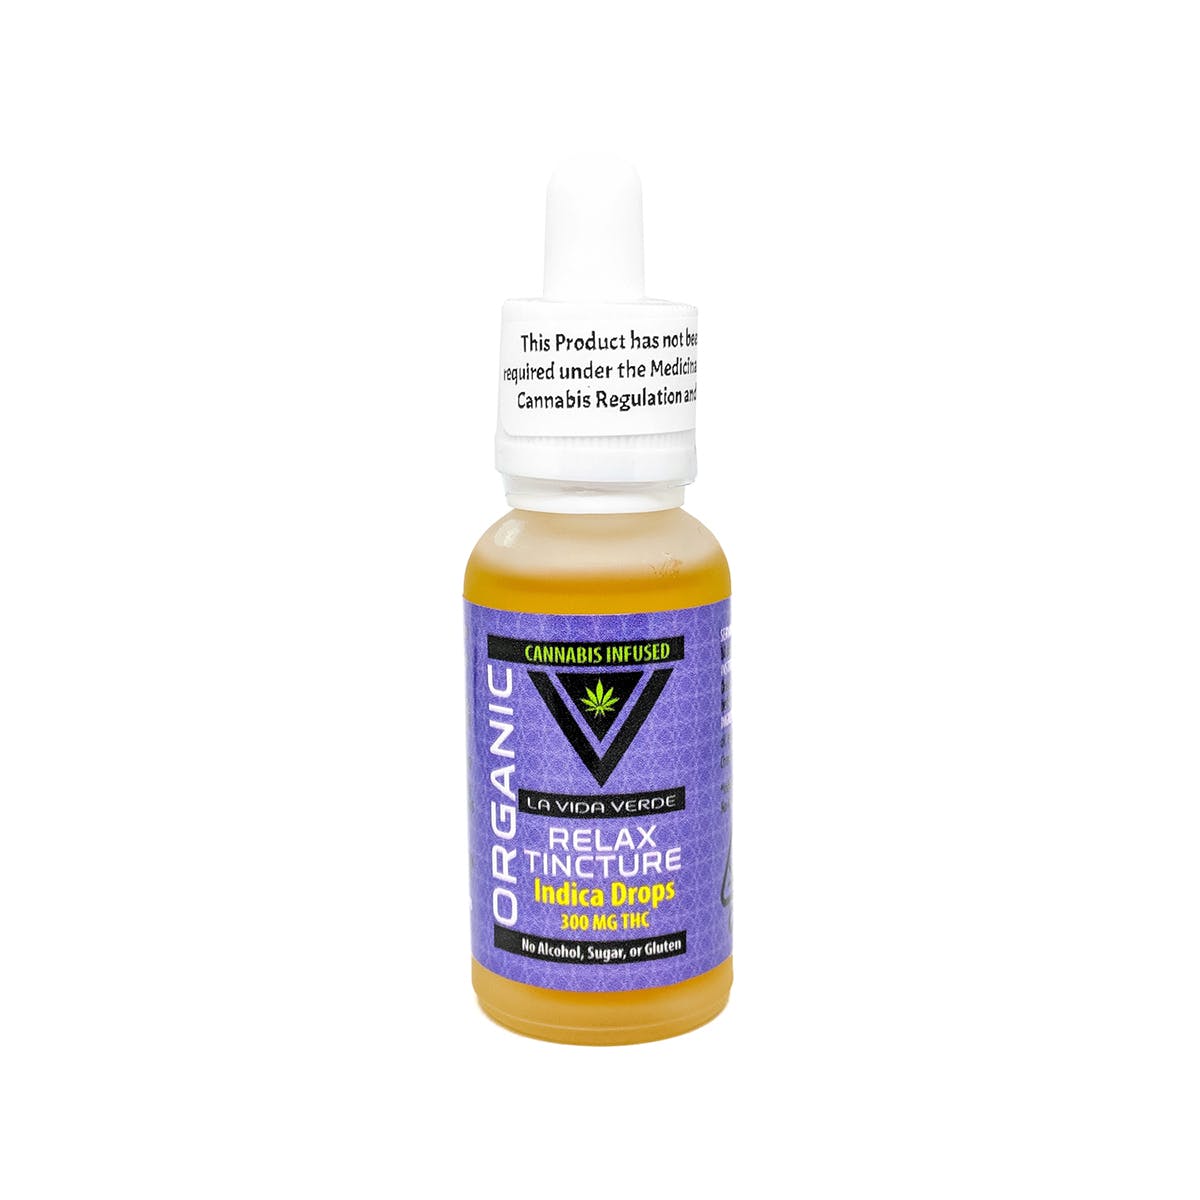 tincture-relax-drops-indica-300mg